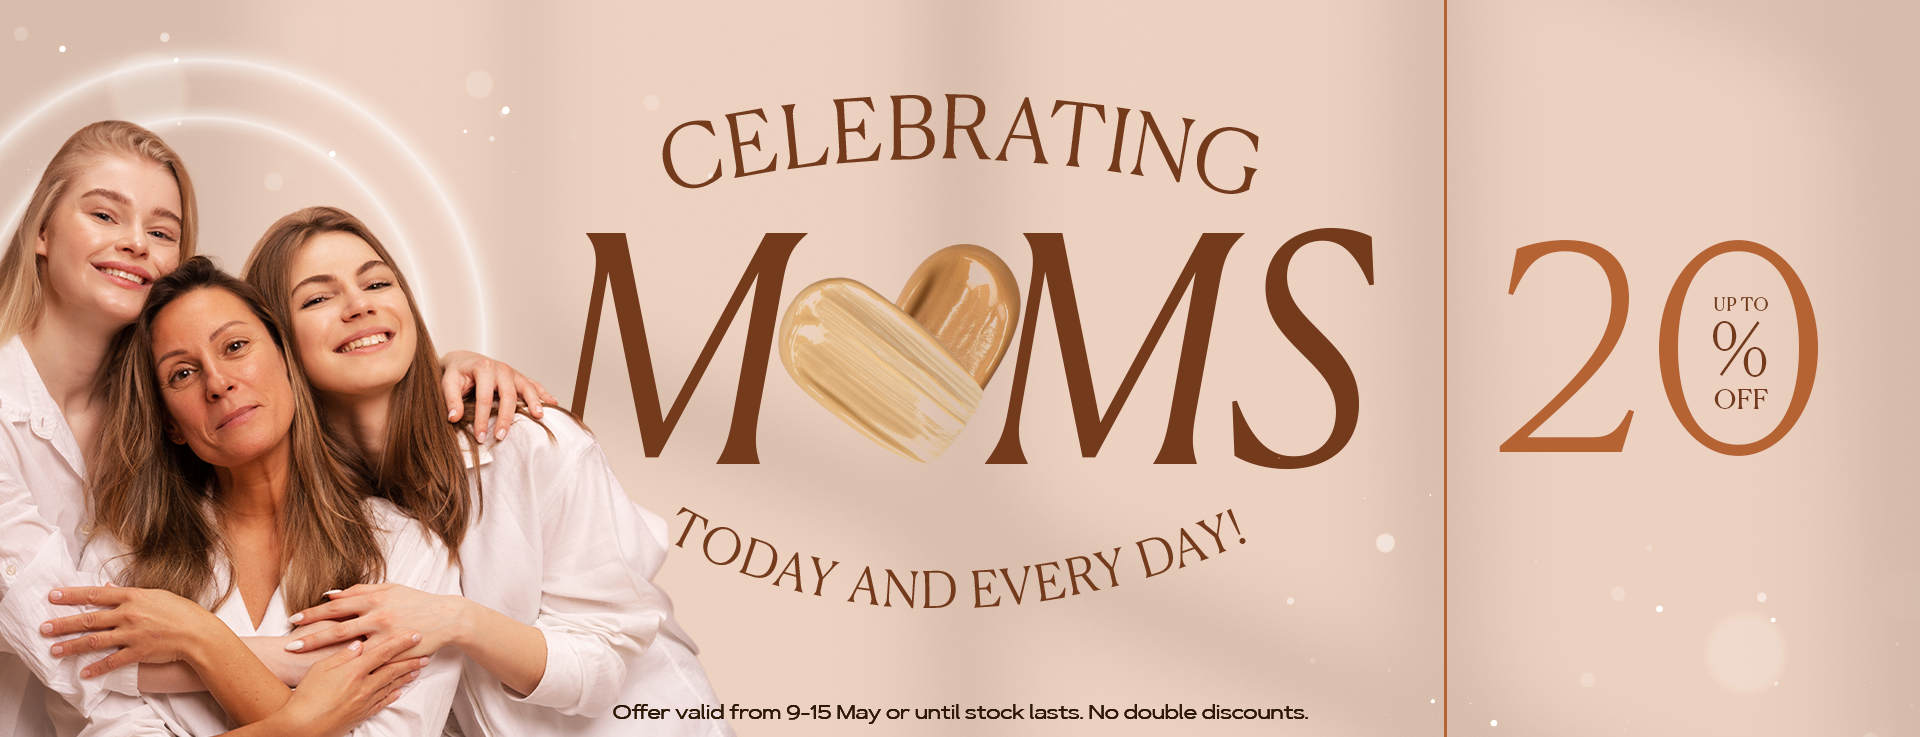 mothers_day_desktop.png__PID:ab561aa6-acd0-40d2-98d9-4be8f96f0e05